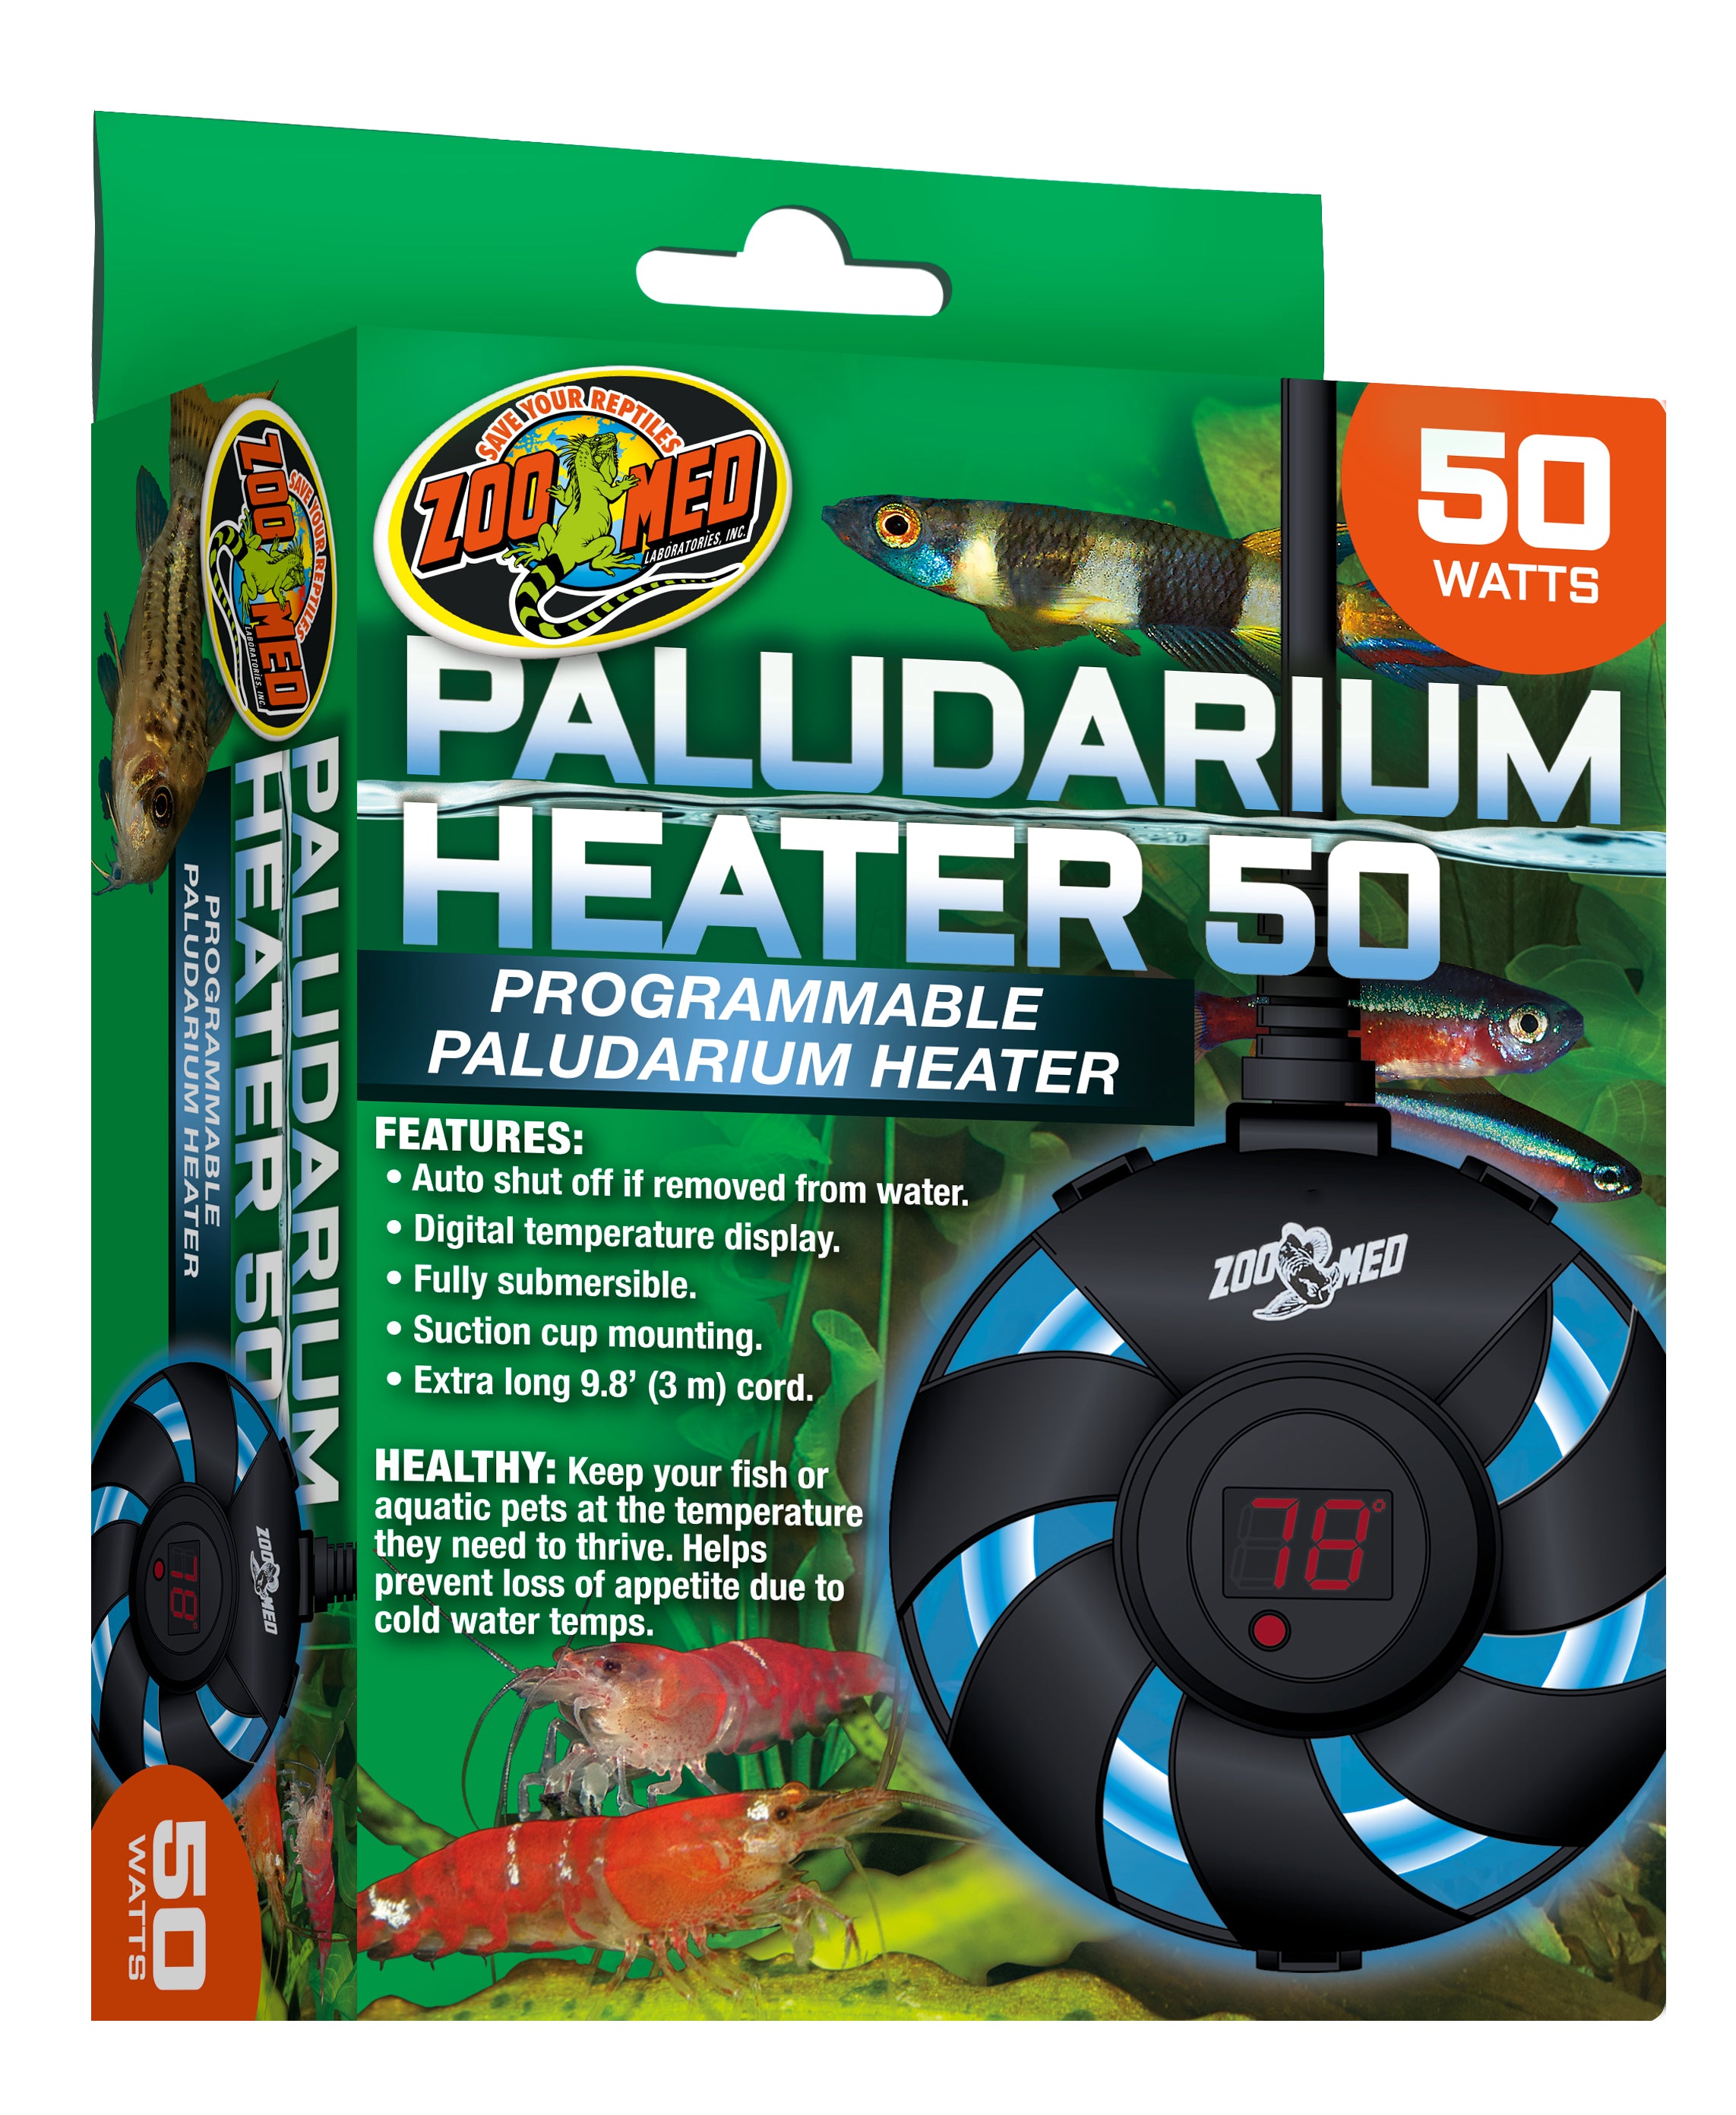 Digital Thermometer™  Zoo Med Laboratories, Inc.